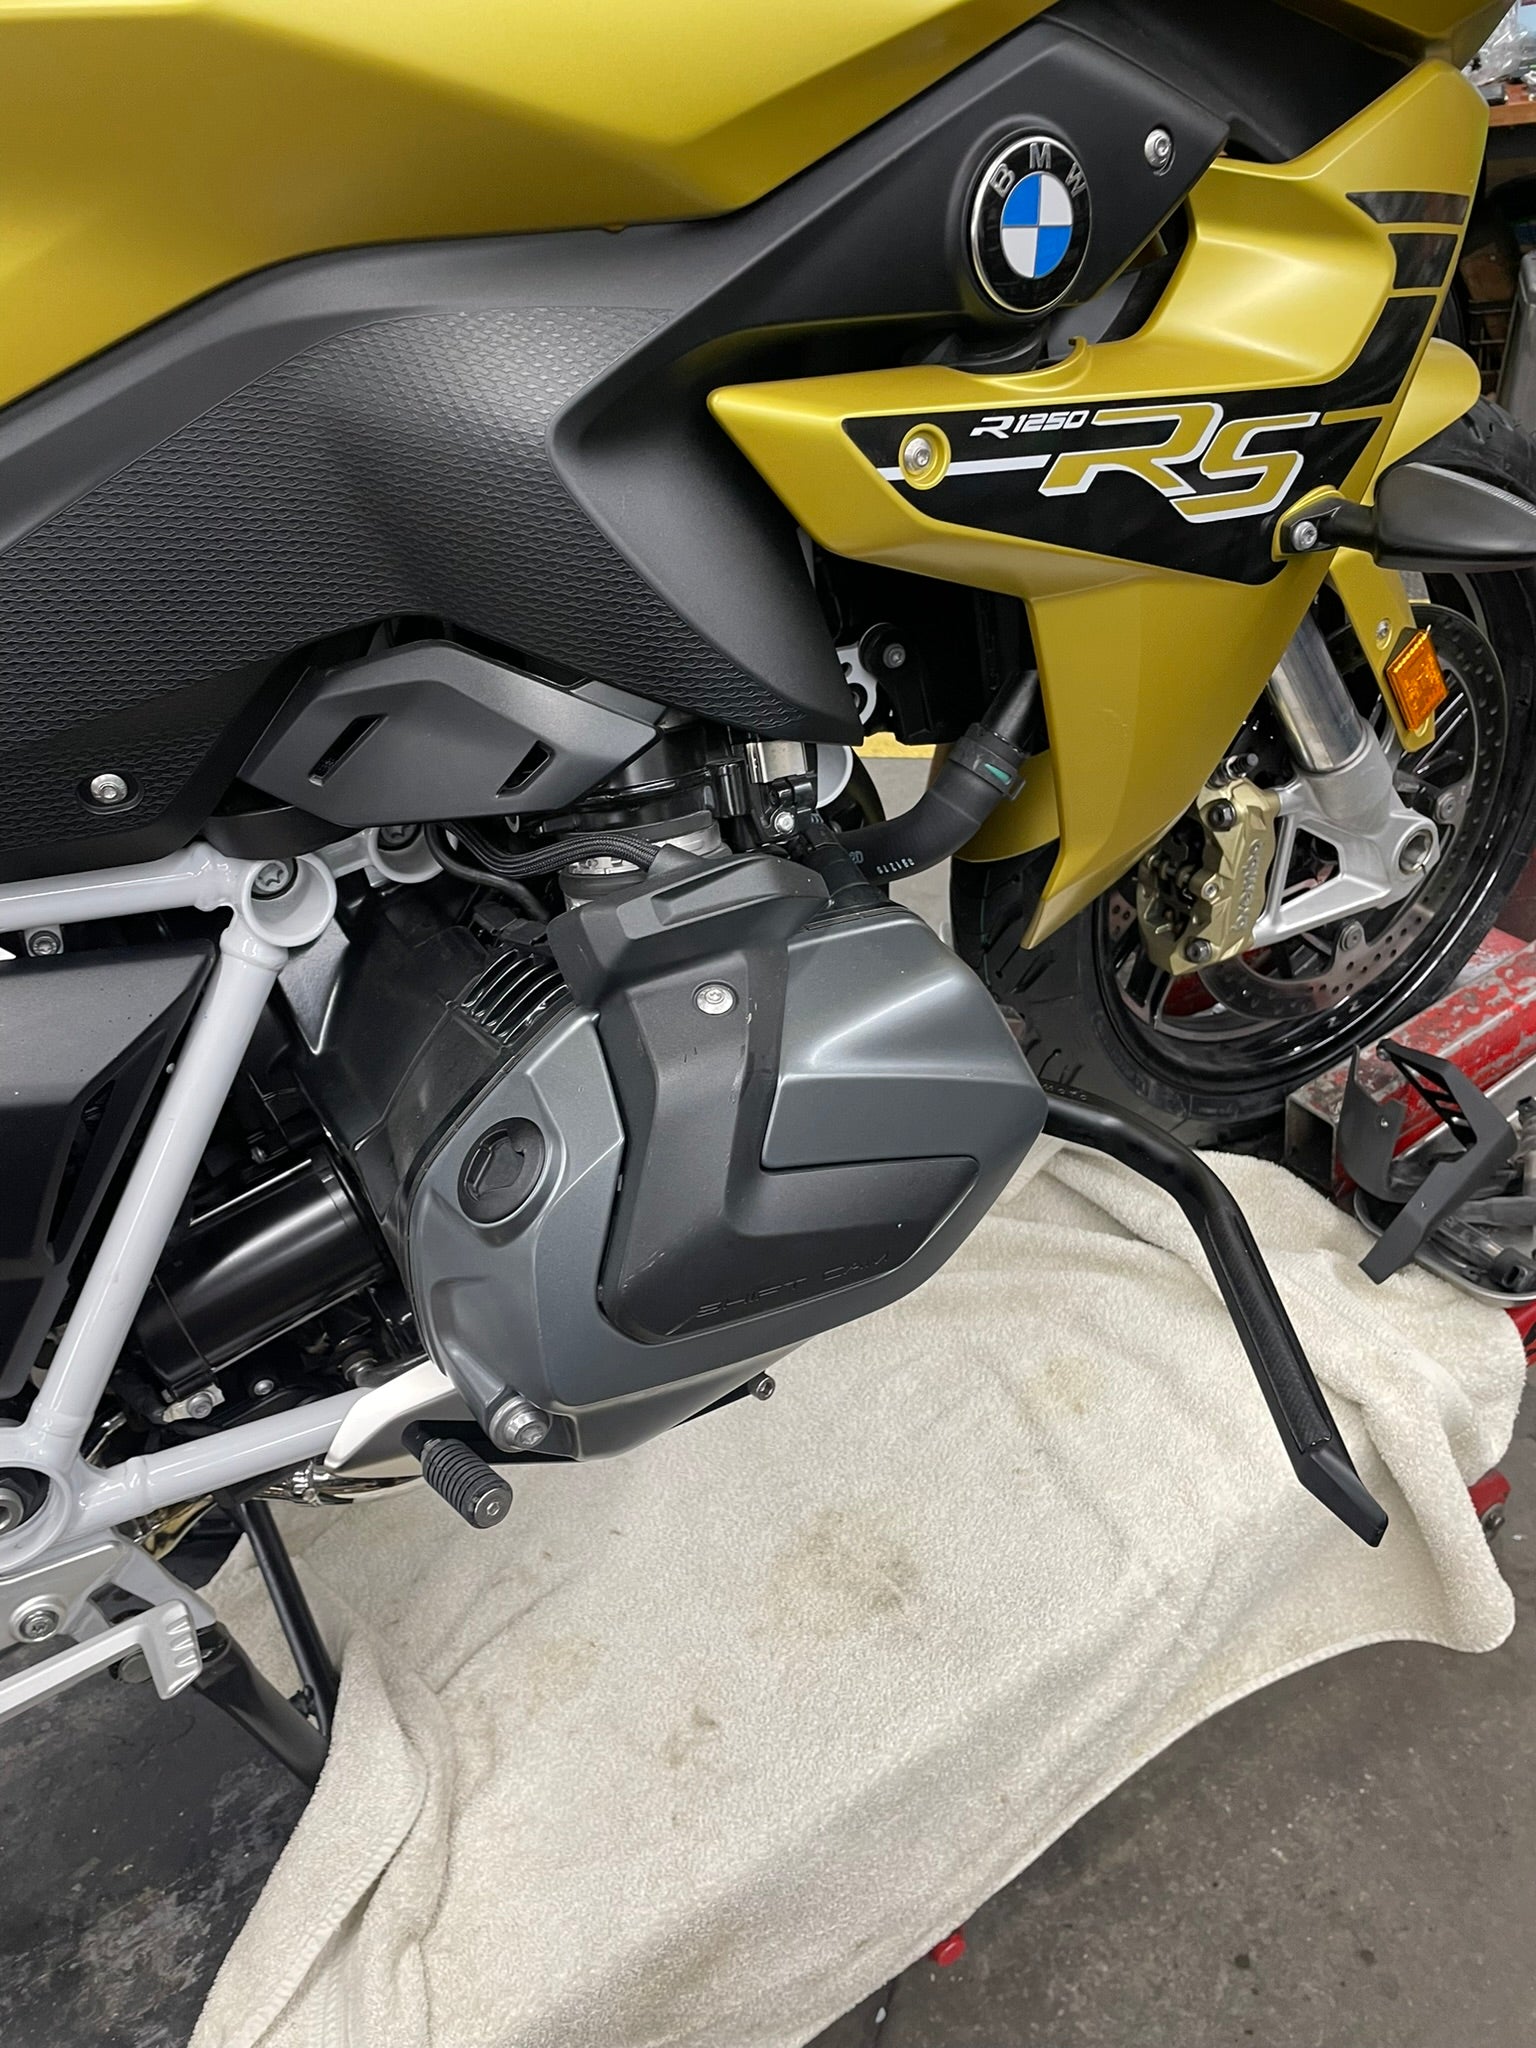 Custom-fit Gemini 1250 highway pegs by IRM Moto for BMW R1250 RS - Superior craftsmanship and elegant integration.